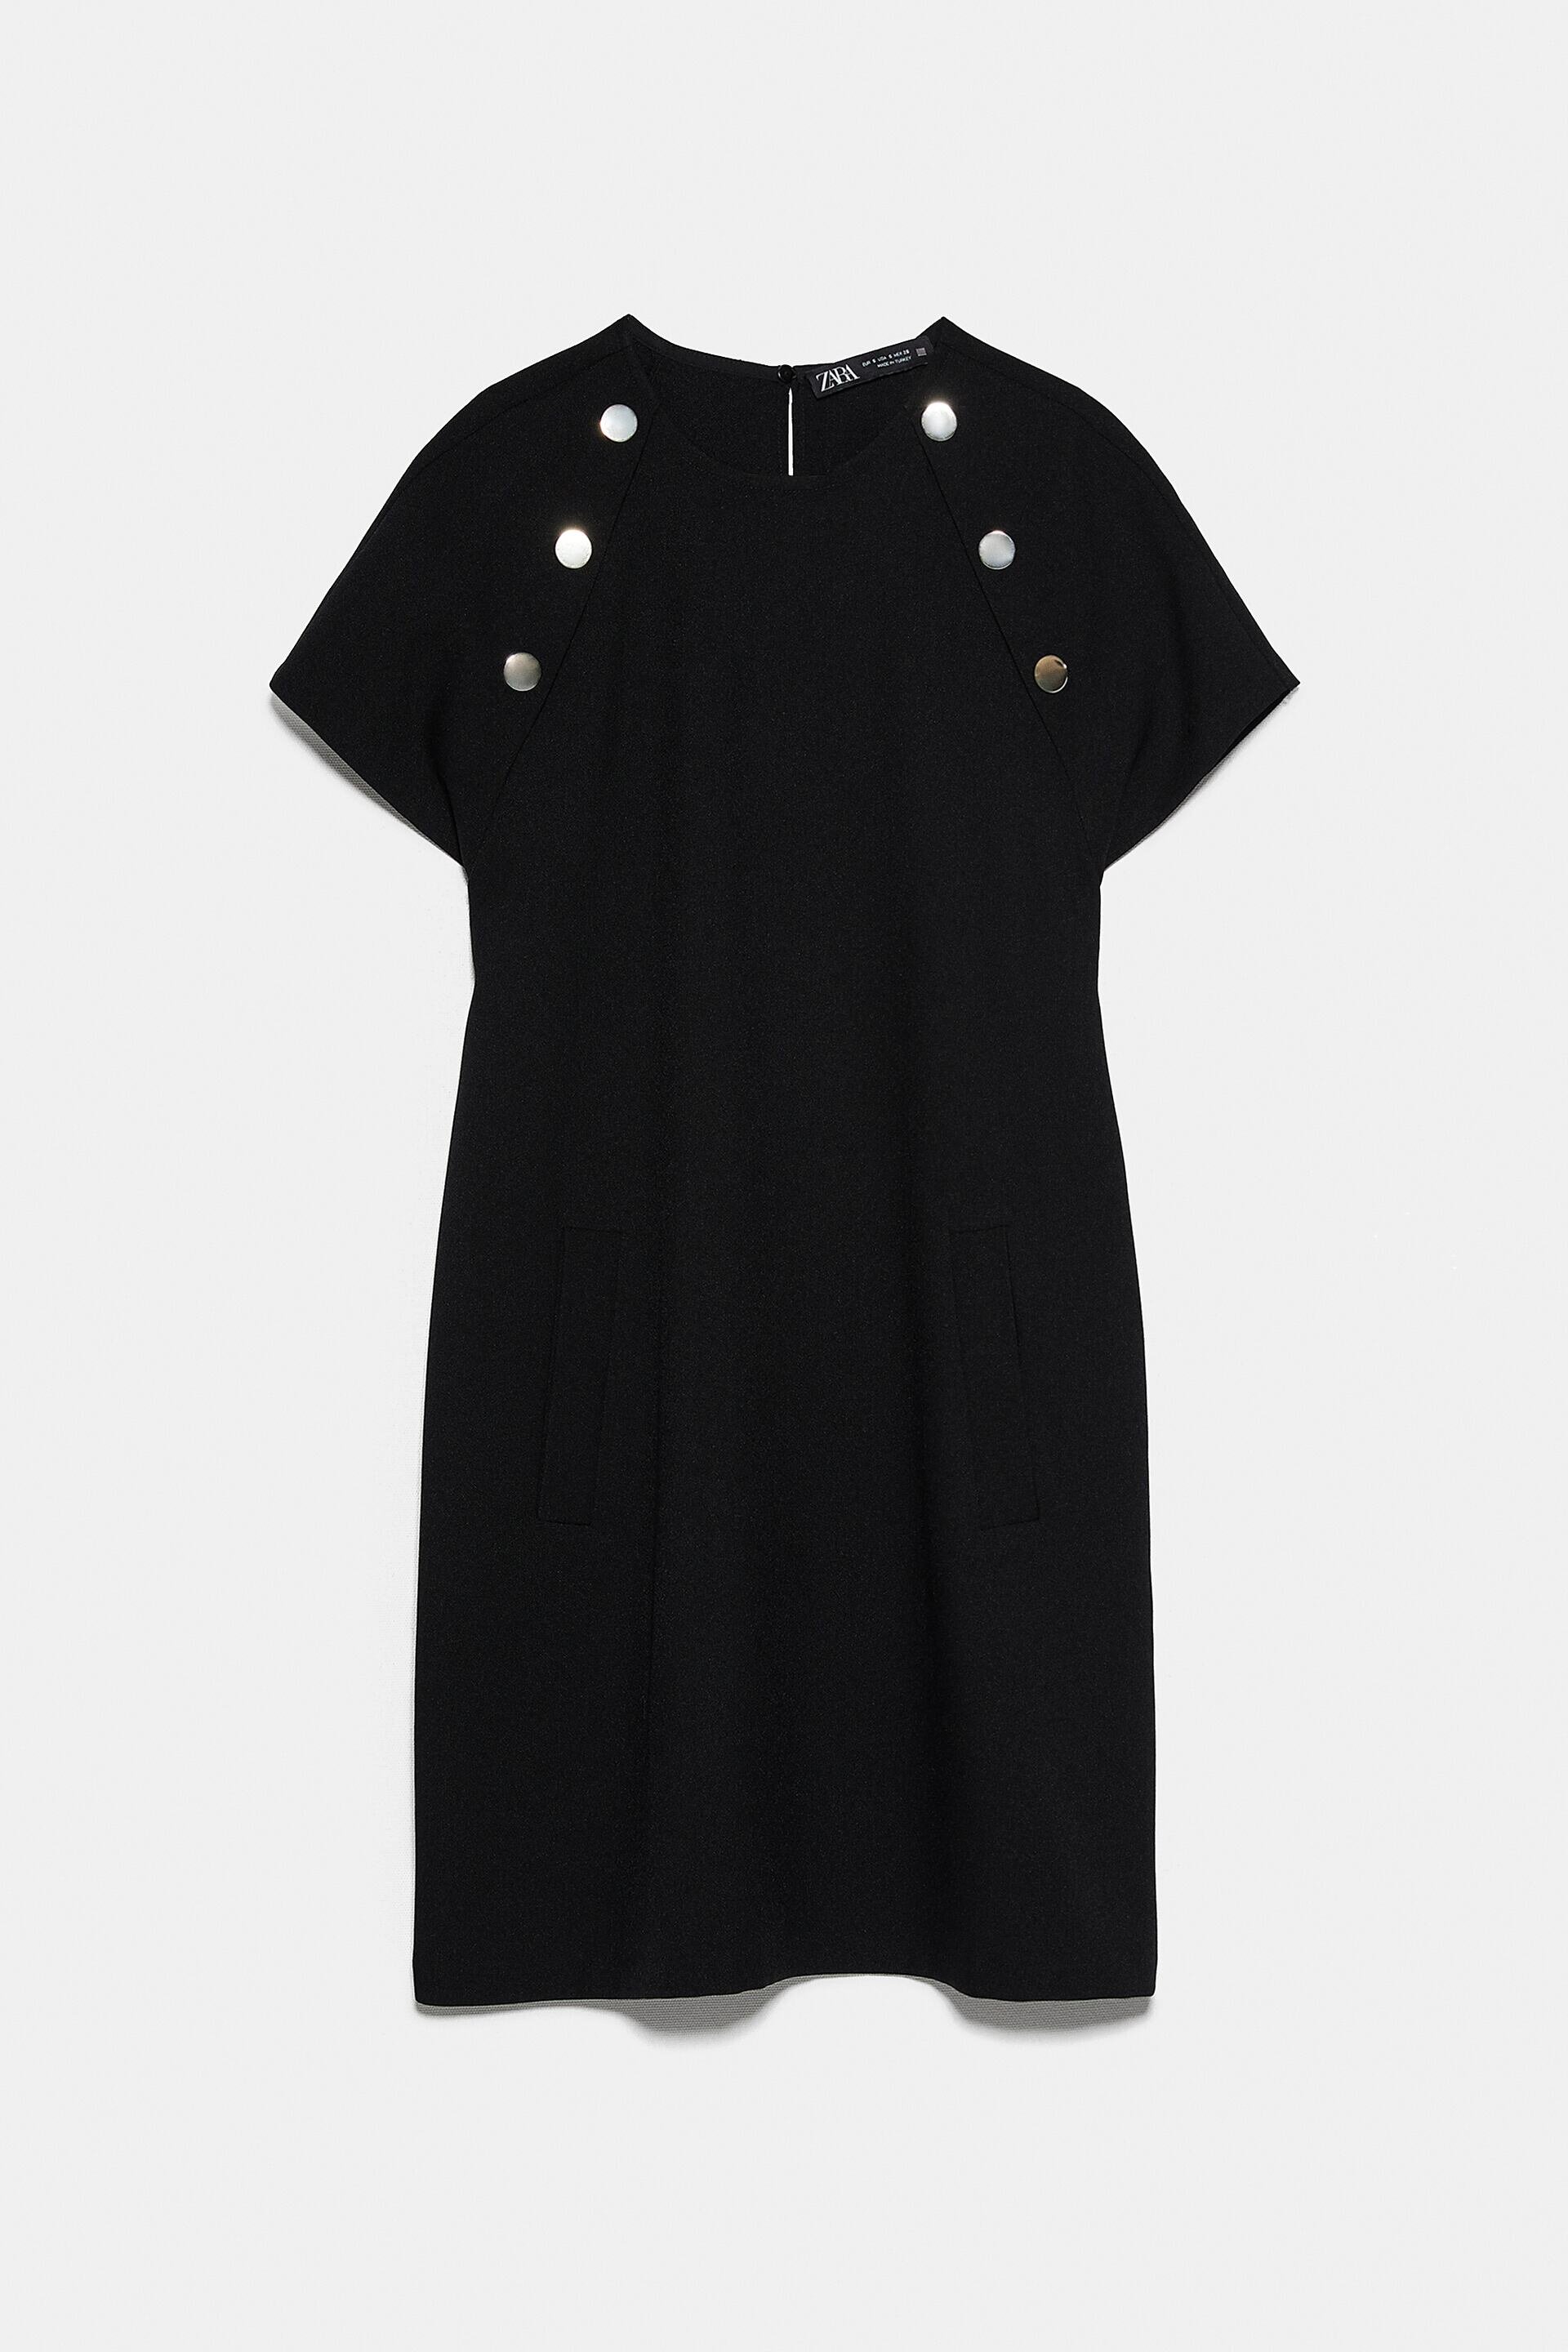 Zara Mini Dress with Buttons in Black 